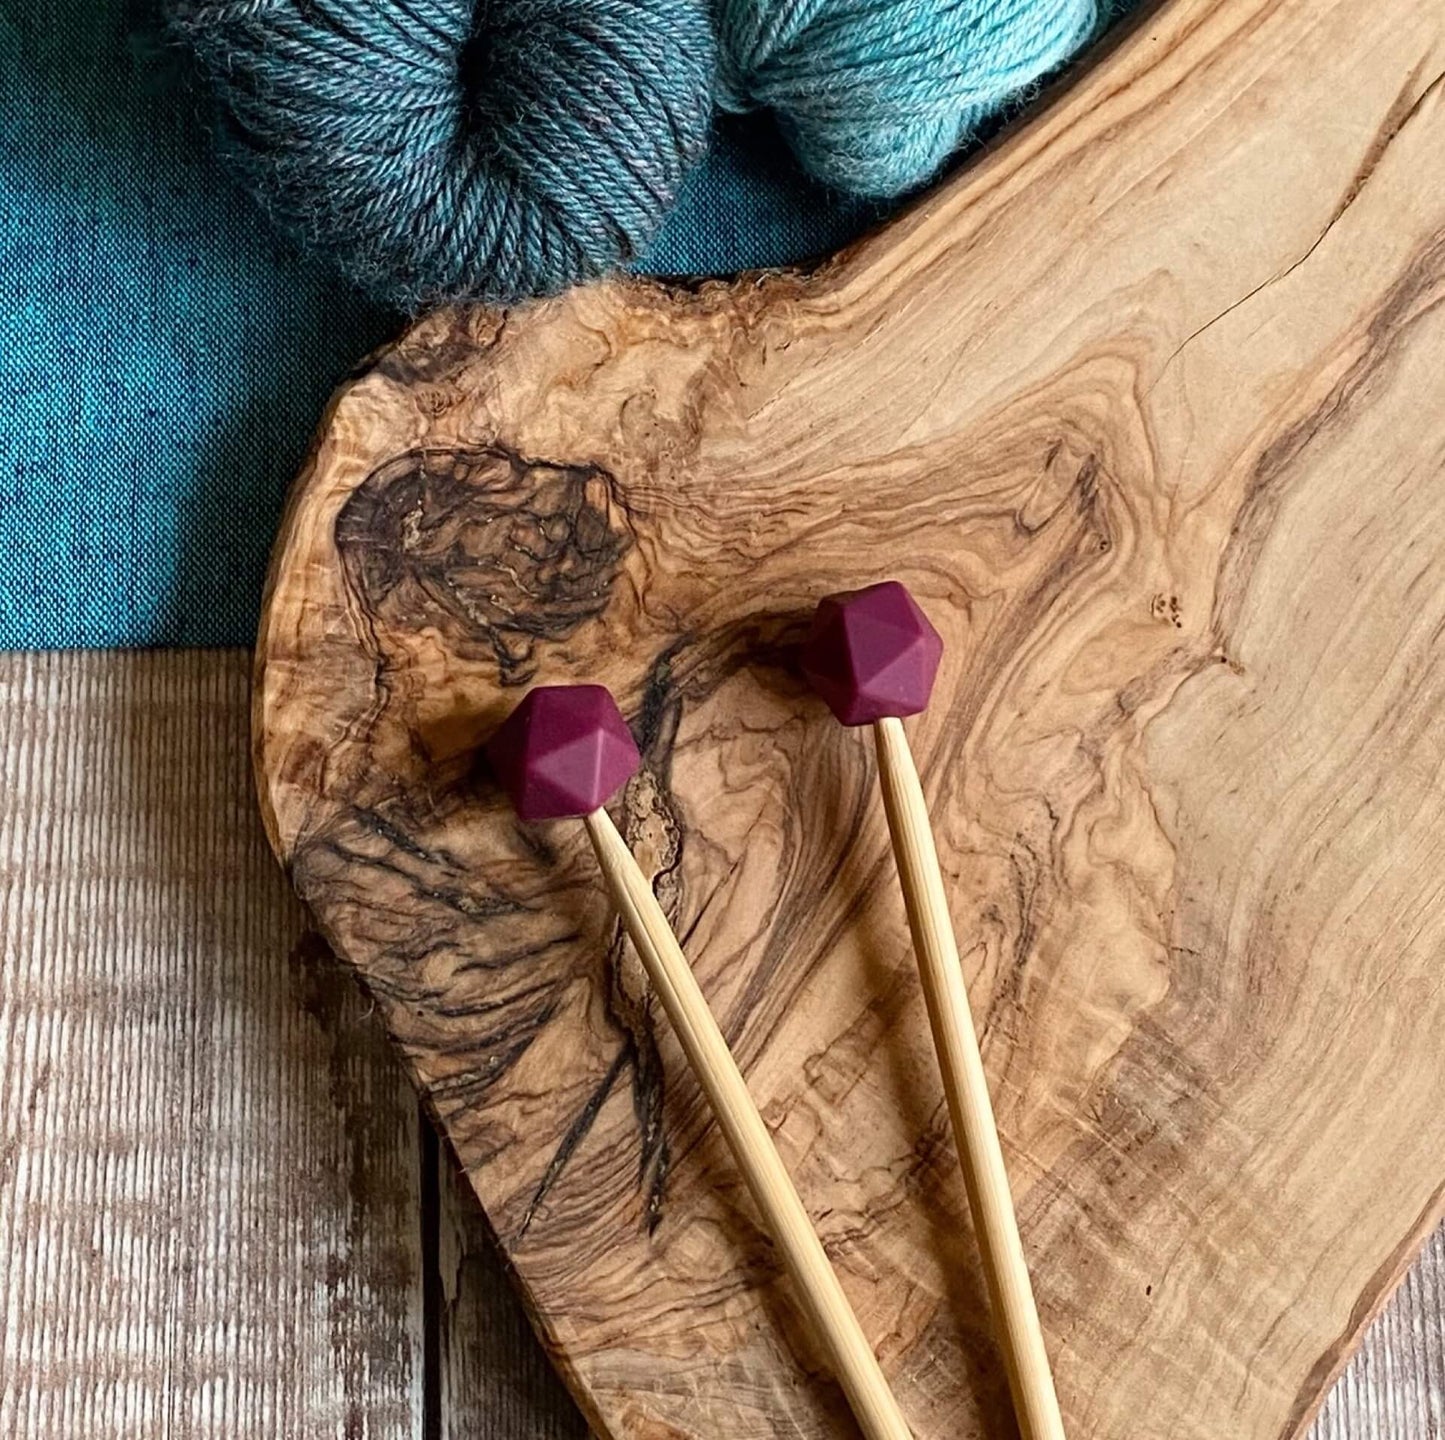 Plum needle protectors to stop stitches escaping from knitting needles. A pair sit on a wooden table attached to knitting needles. 